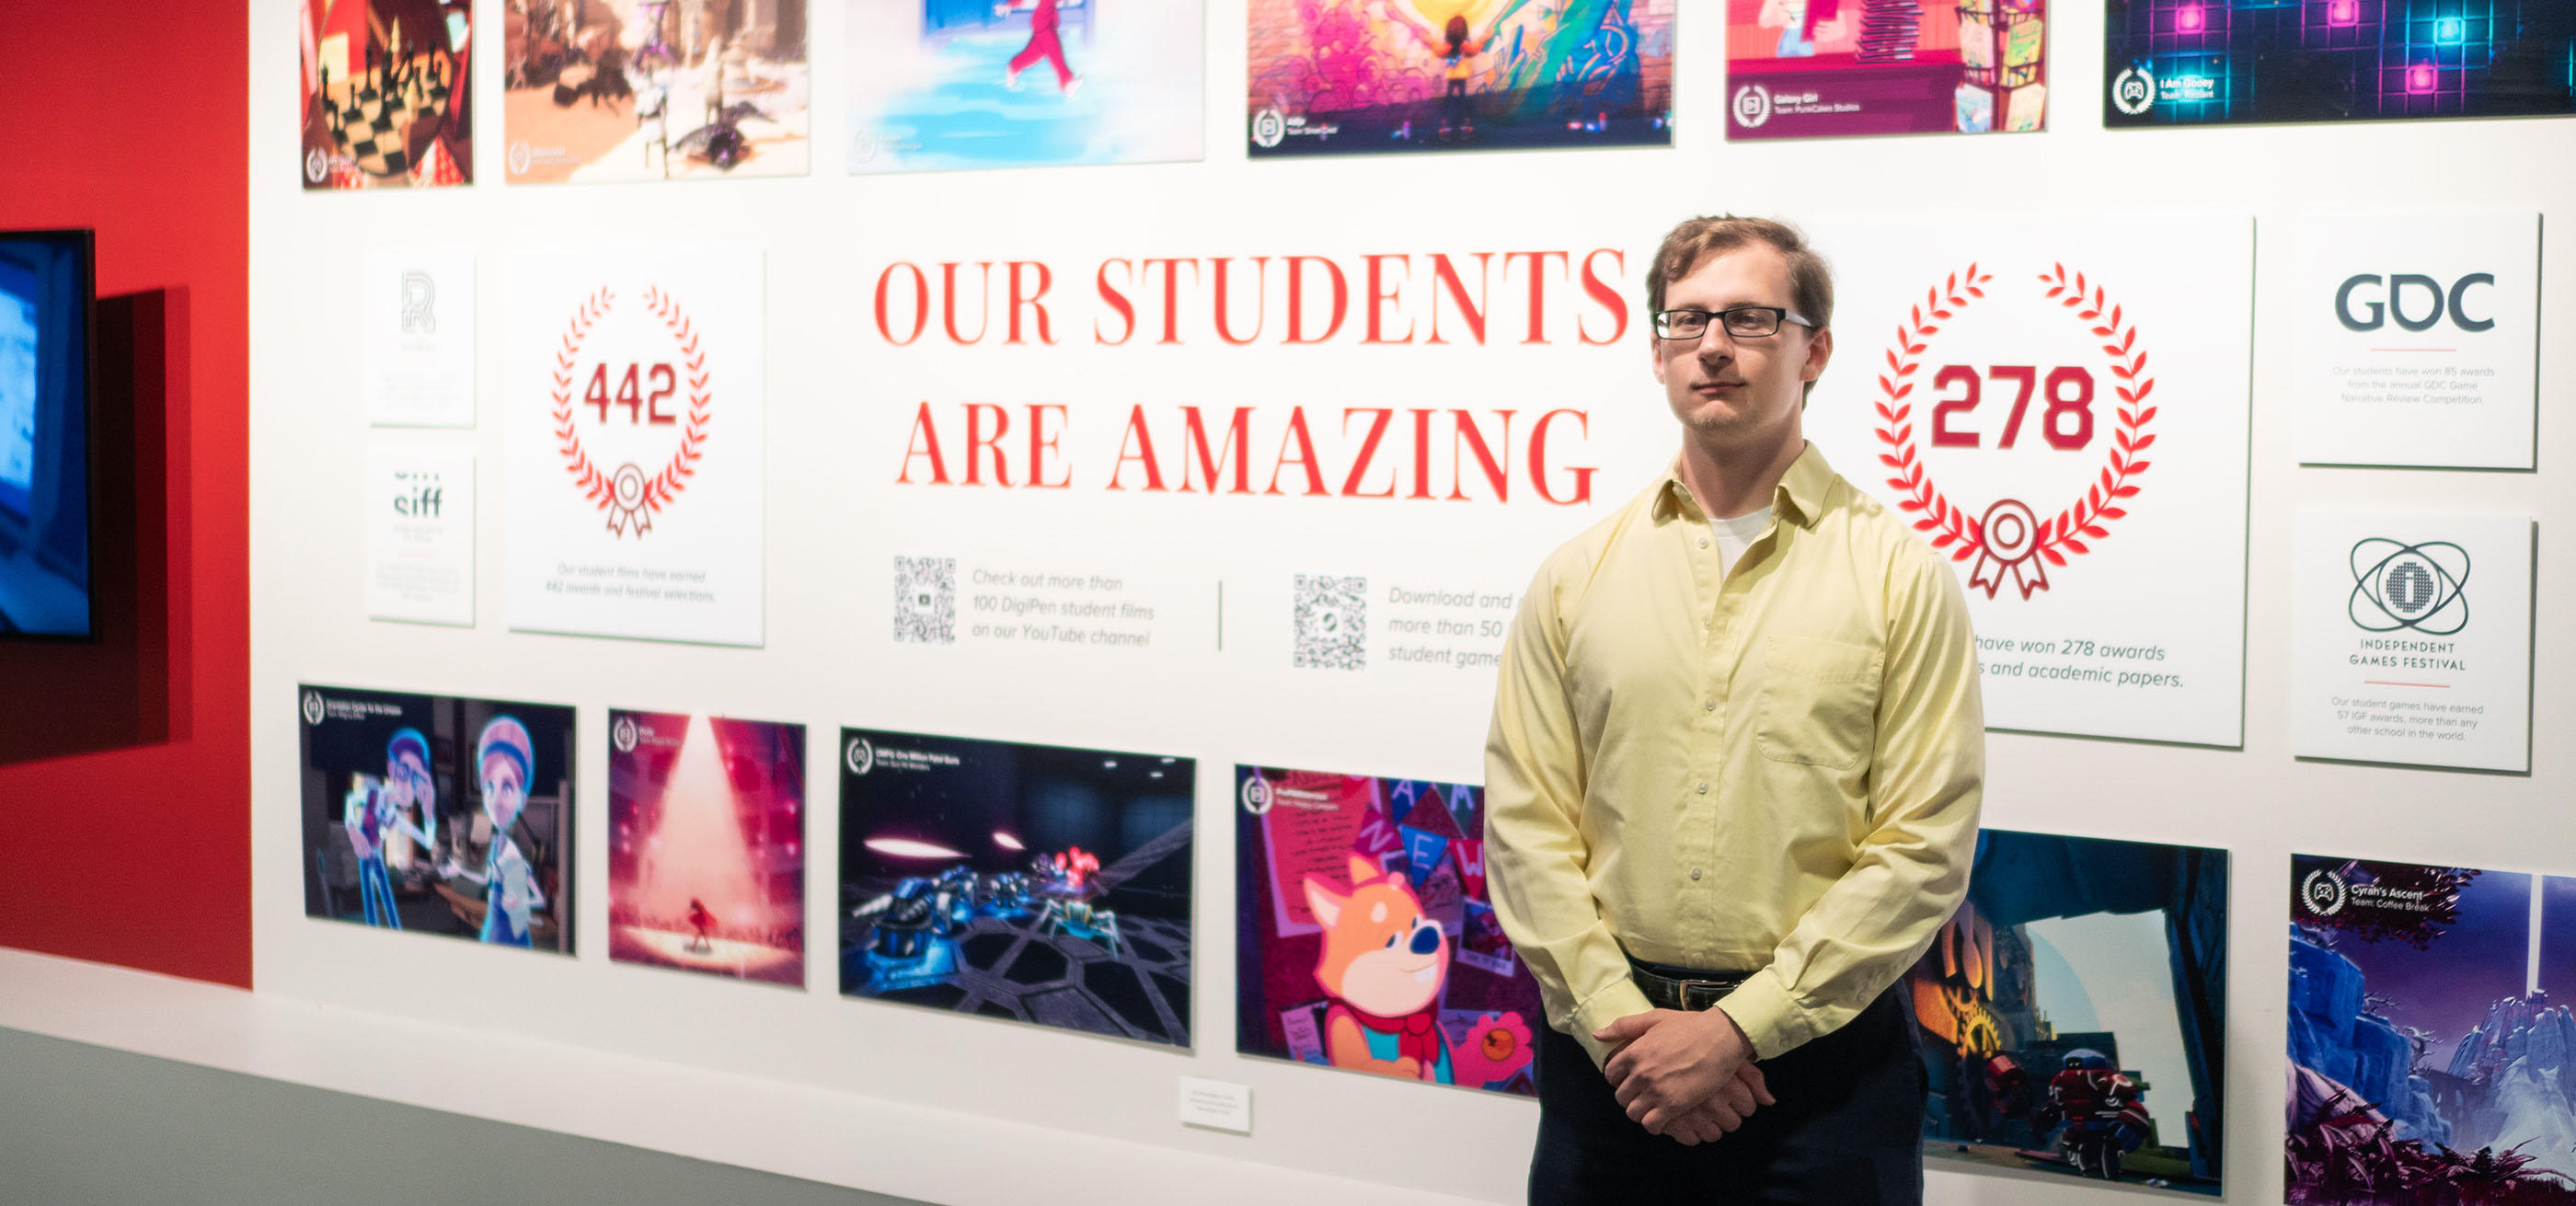 Joseph Crump poses with his hands folded in front of a DigiPen campus hallway display.